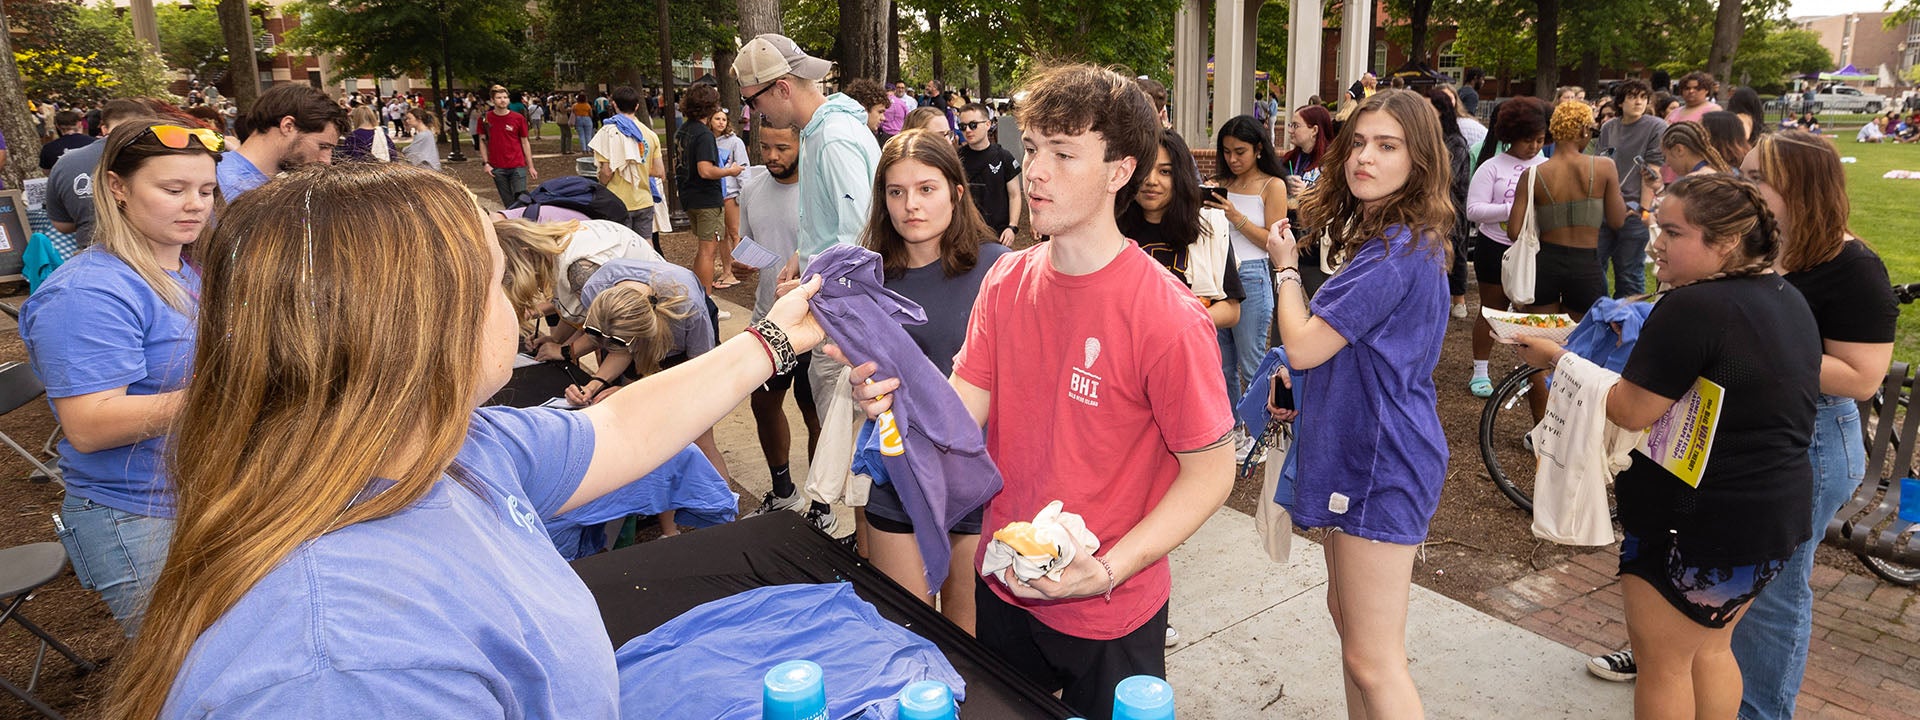 Students stand in line for a T-shirt at Barefoot on the Mall. (ECU photos by Rhett Butler)